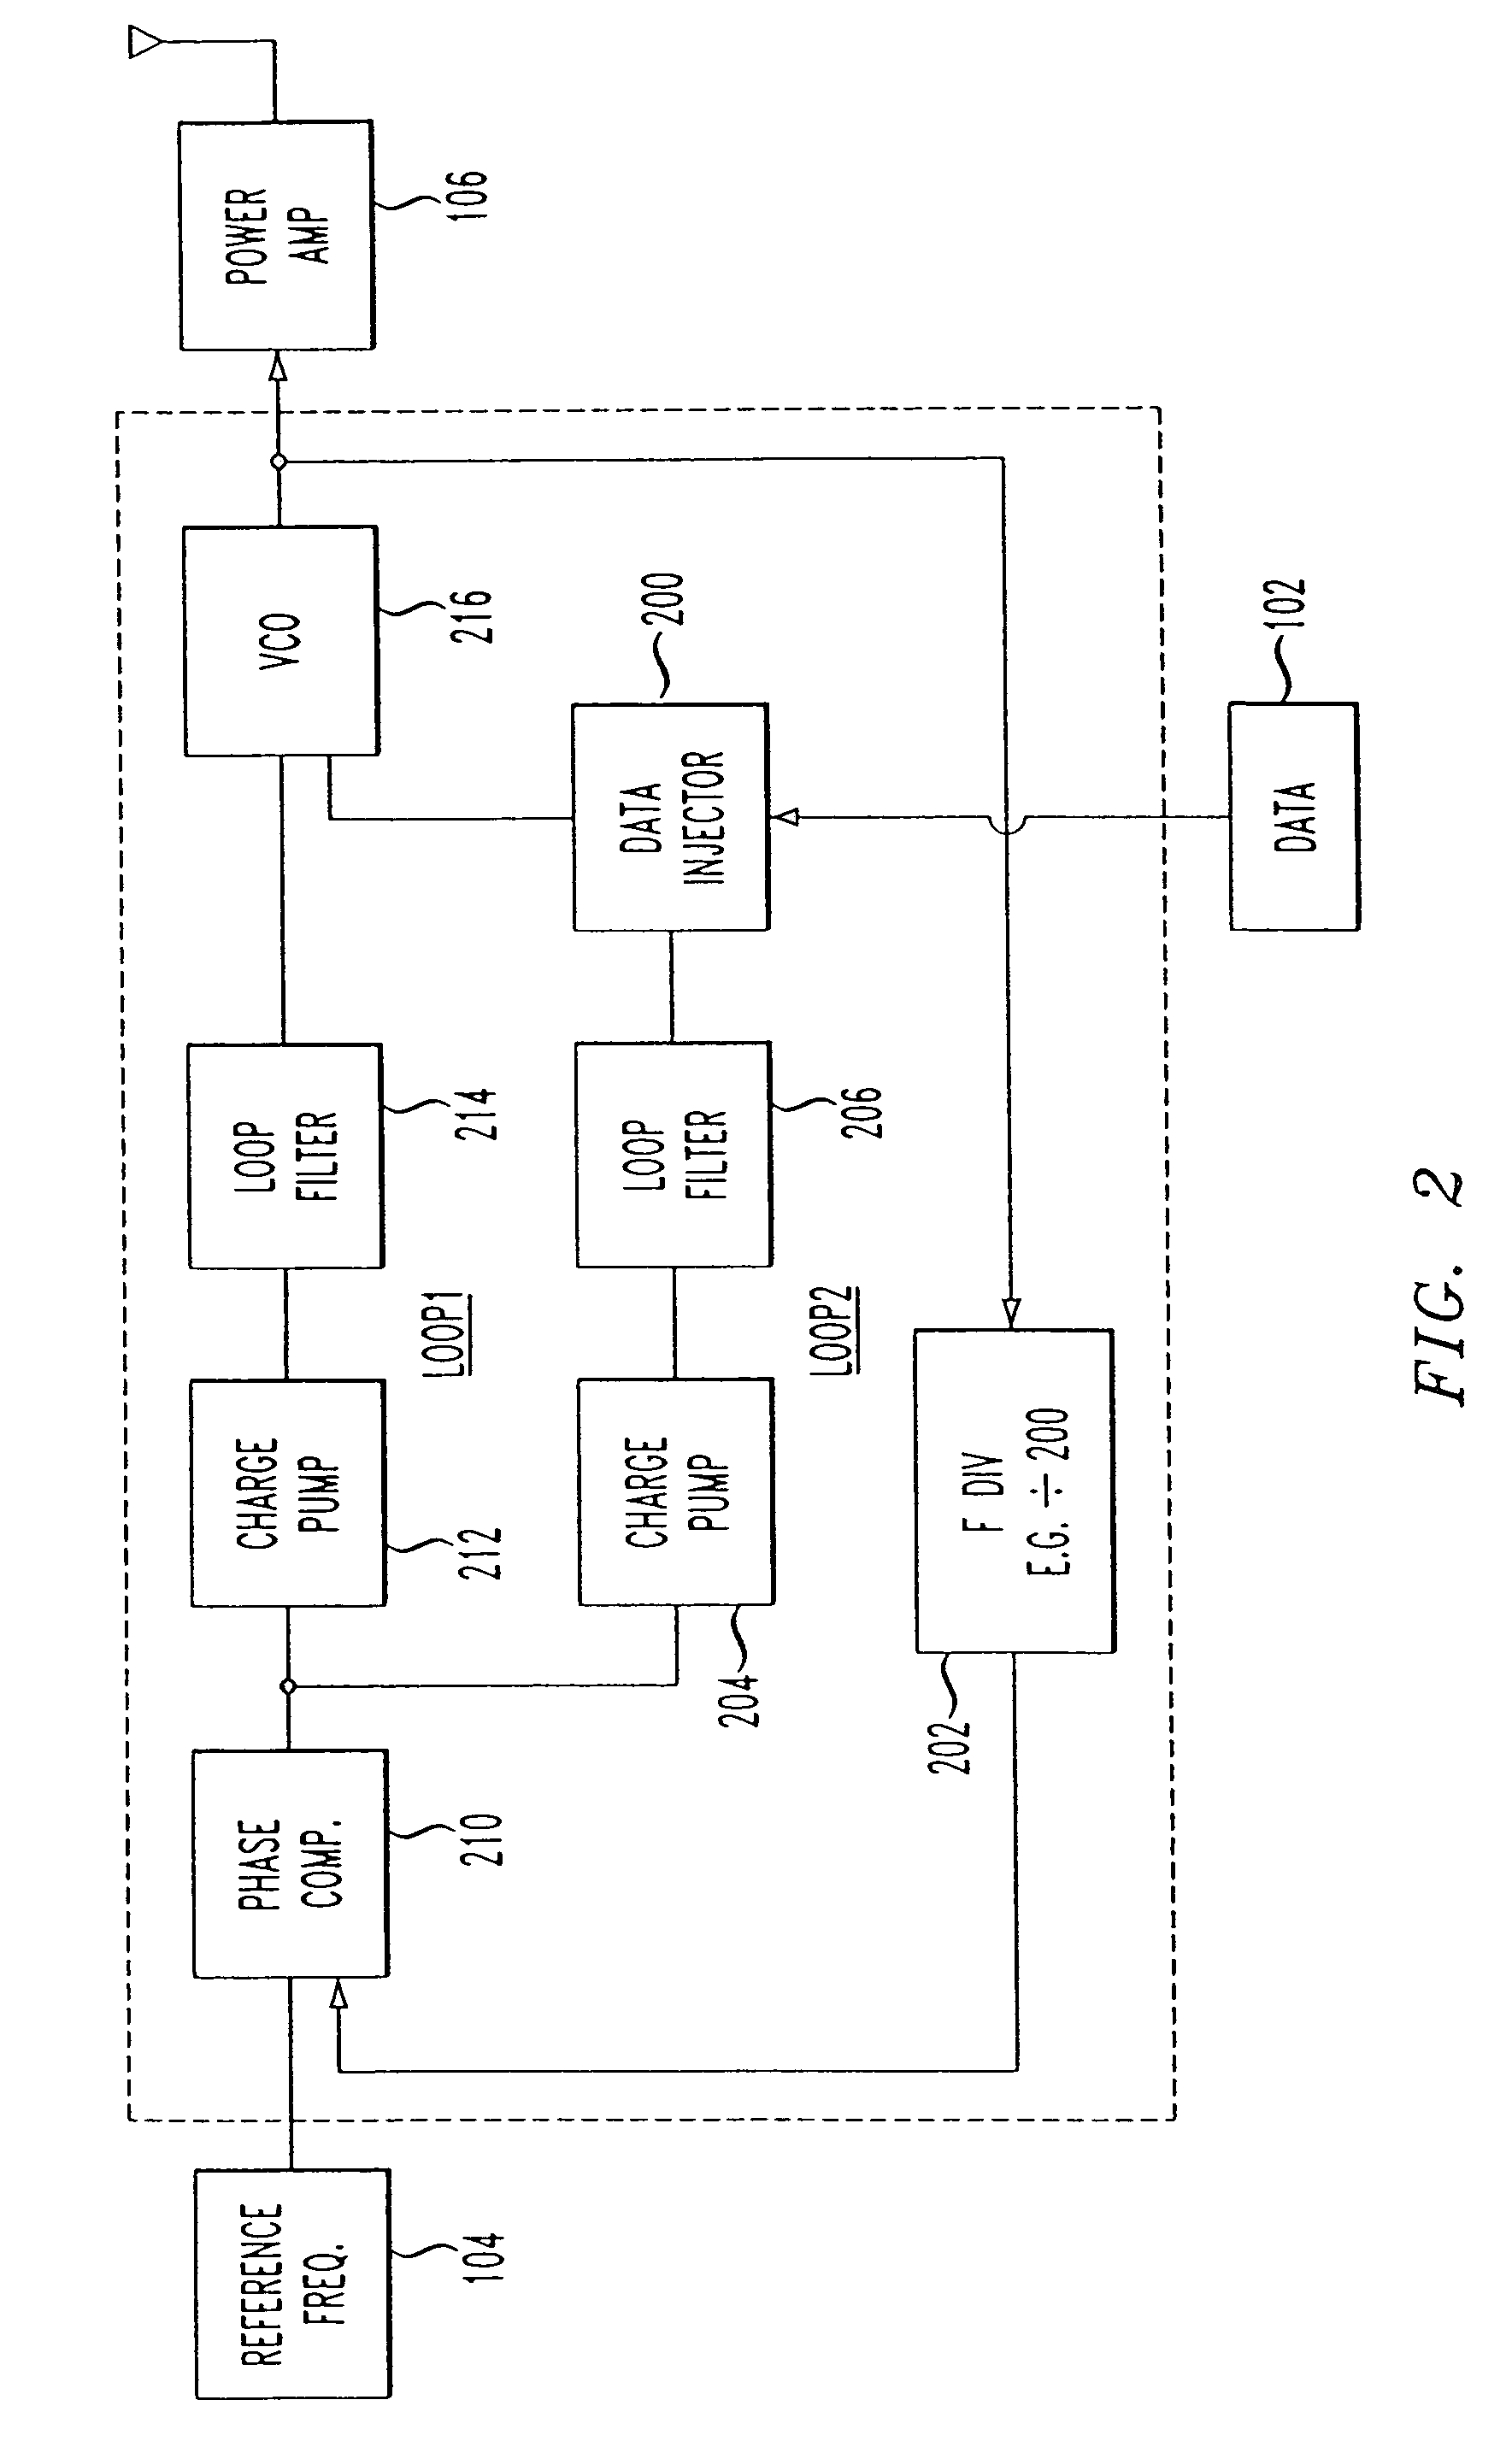 Accurate gain direct modulation (KMOD) using a dual-loop PLL